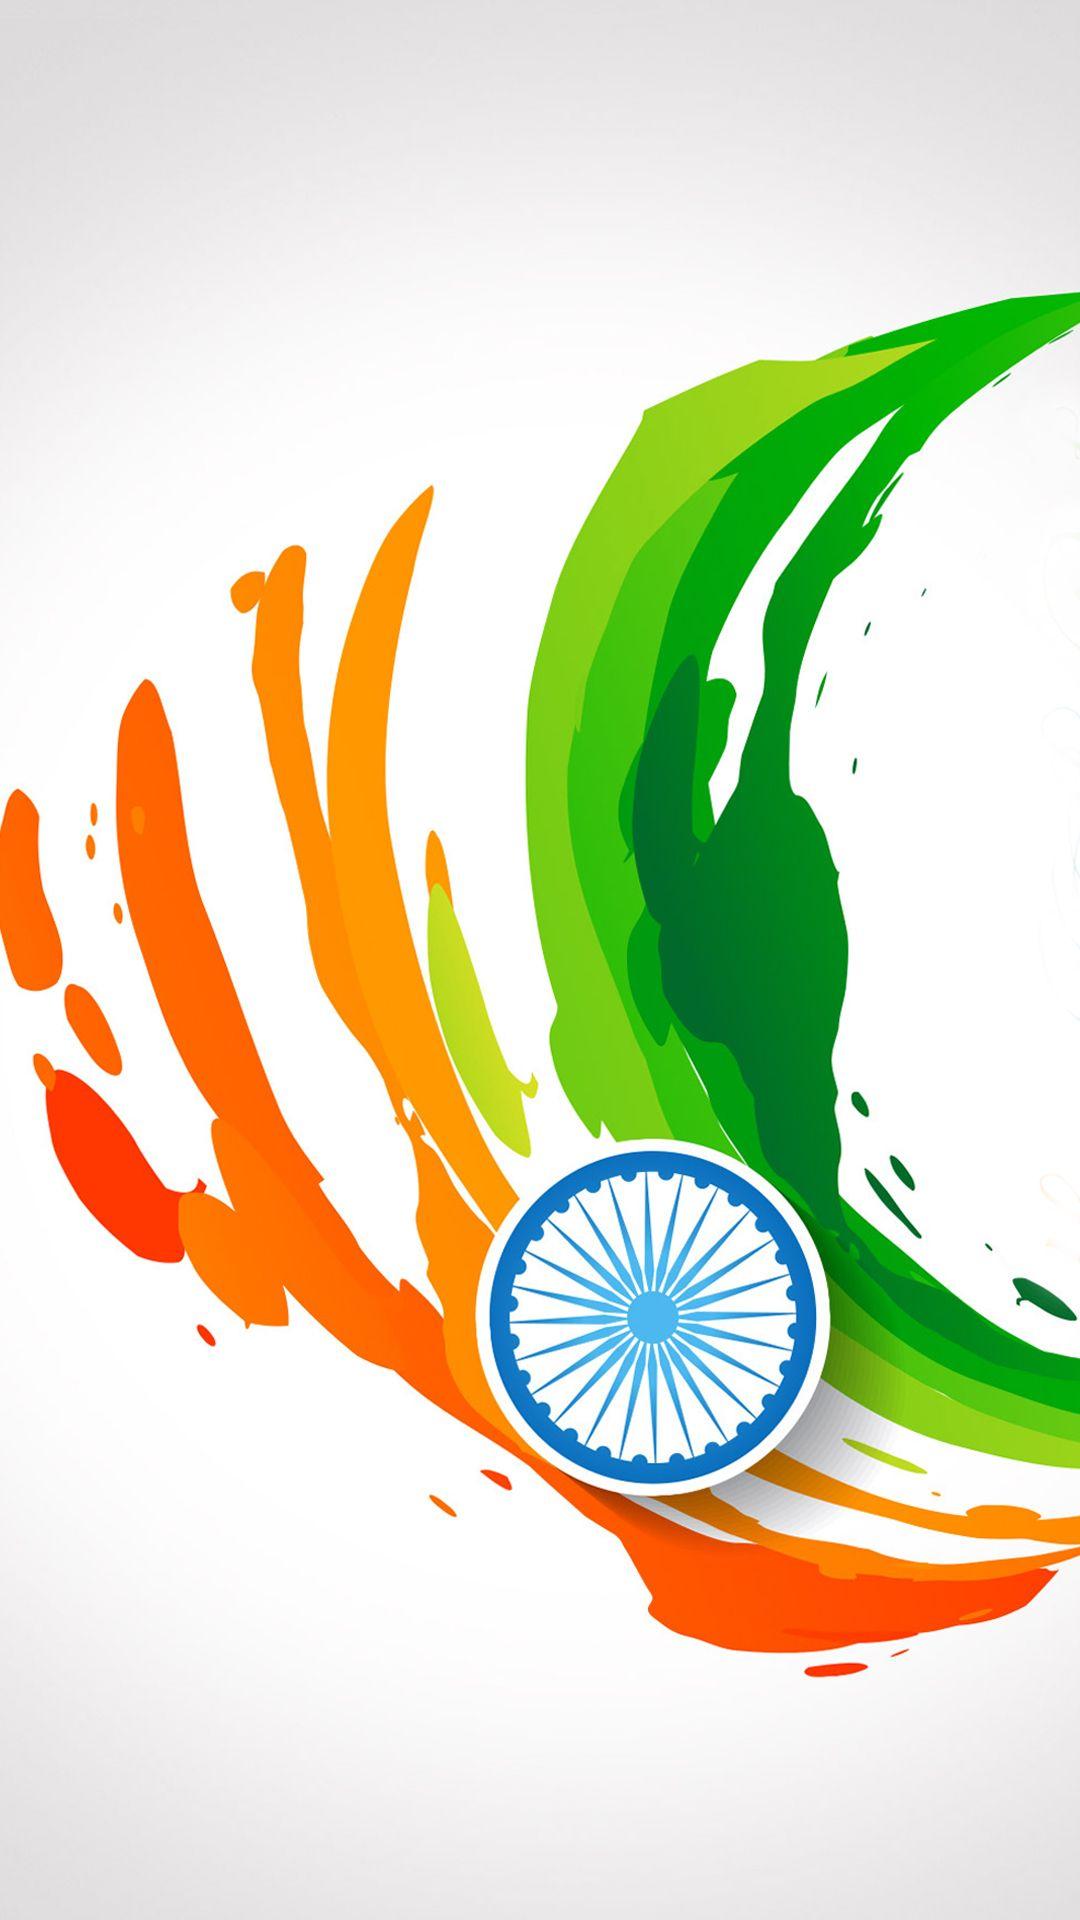 India Flag for Mobile Phone Wallpaper 14 of 17